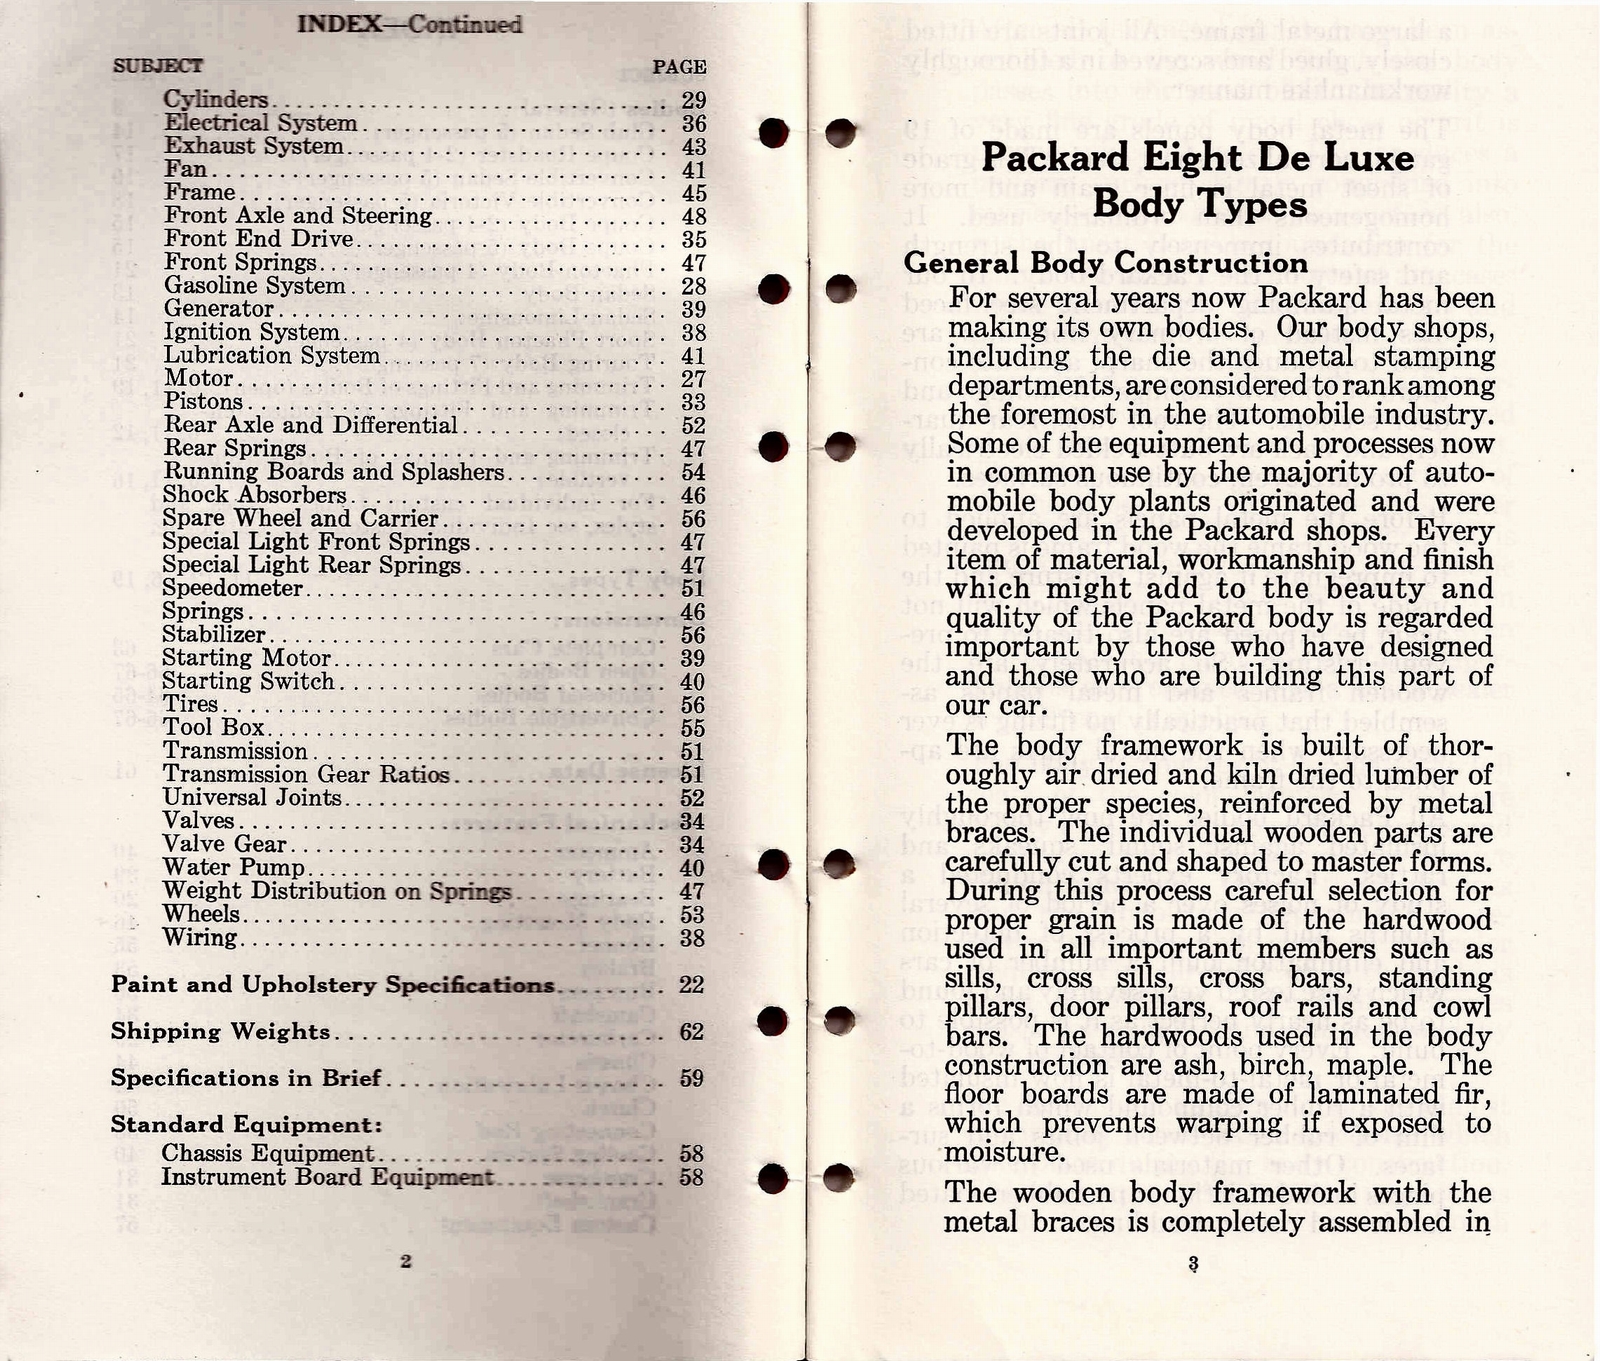 n_1932 Packard Eight Deluxe Facts Book-02-034.jpg